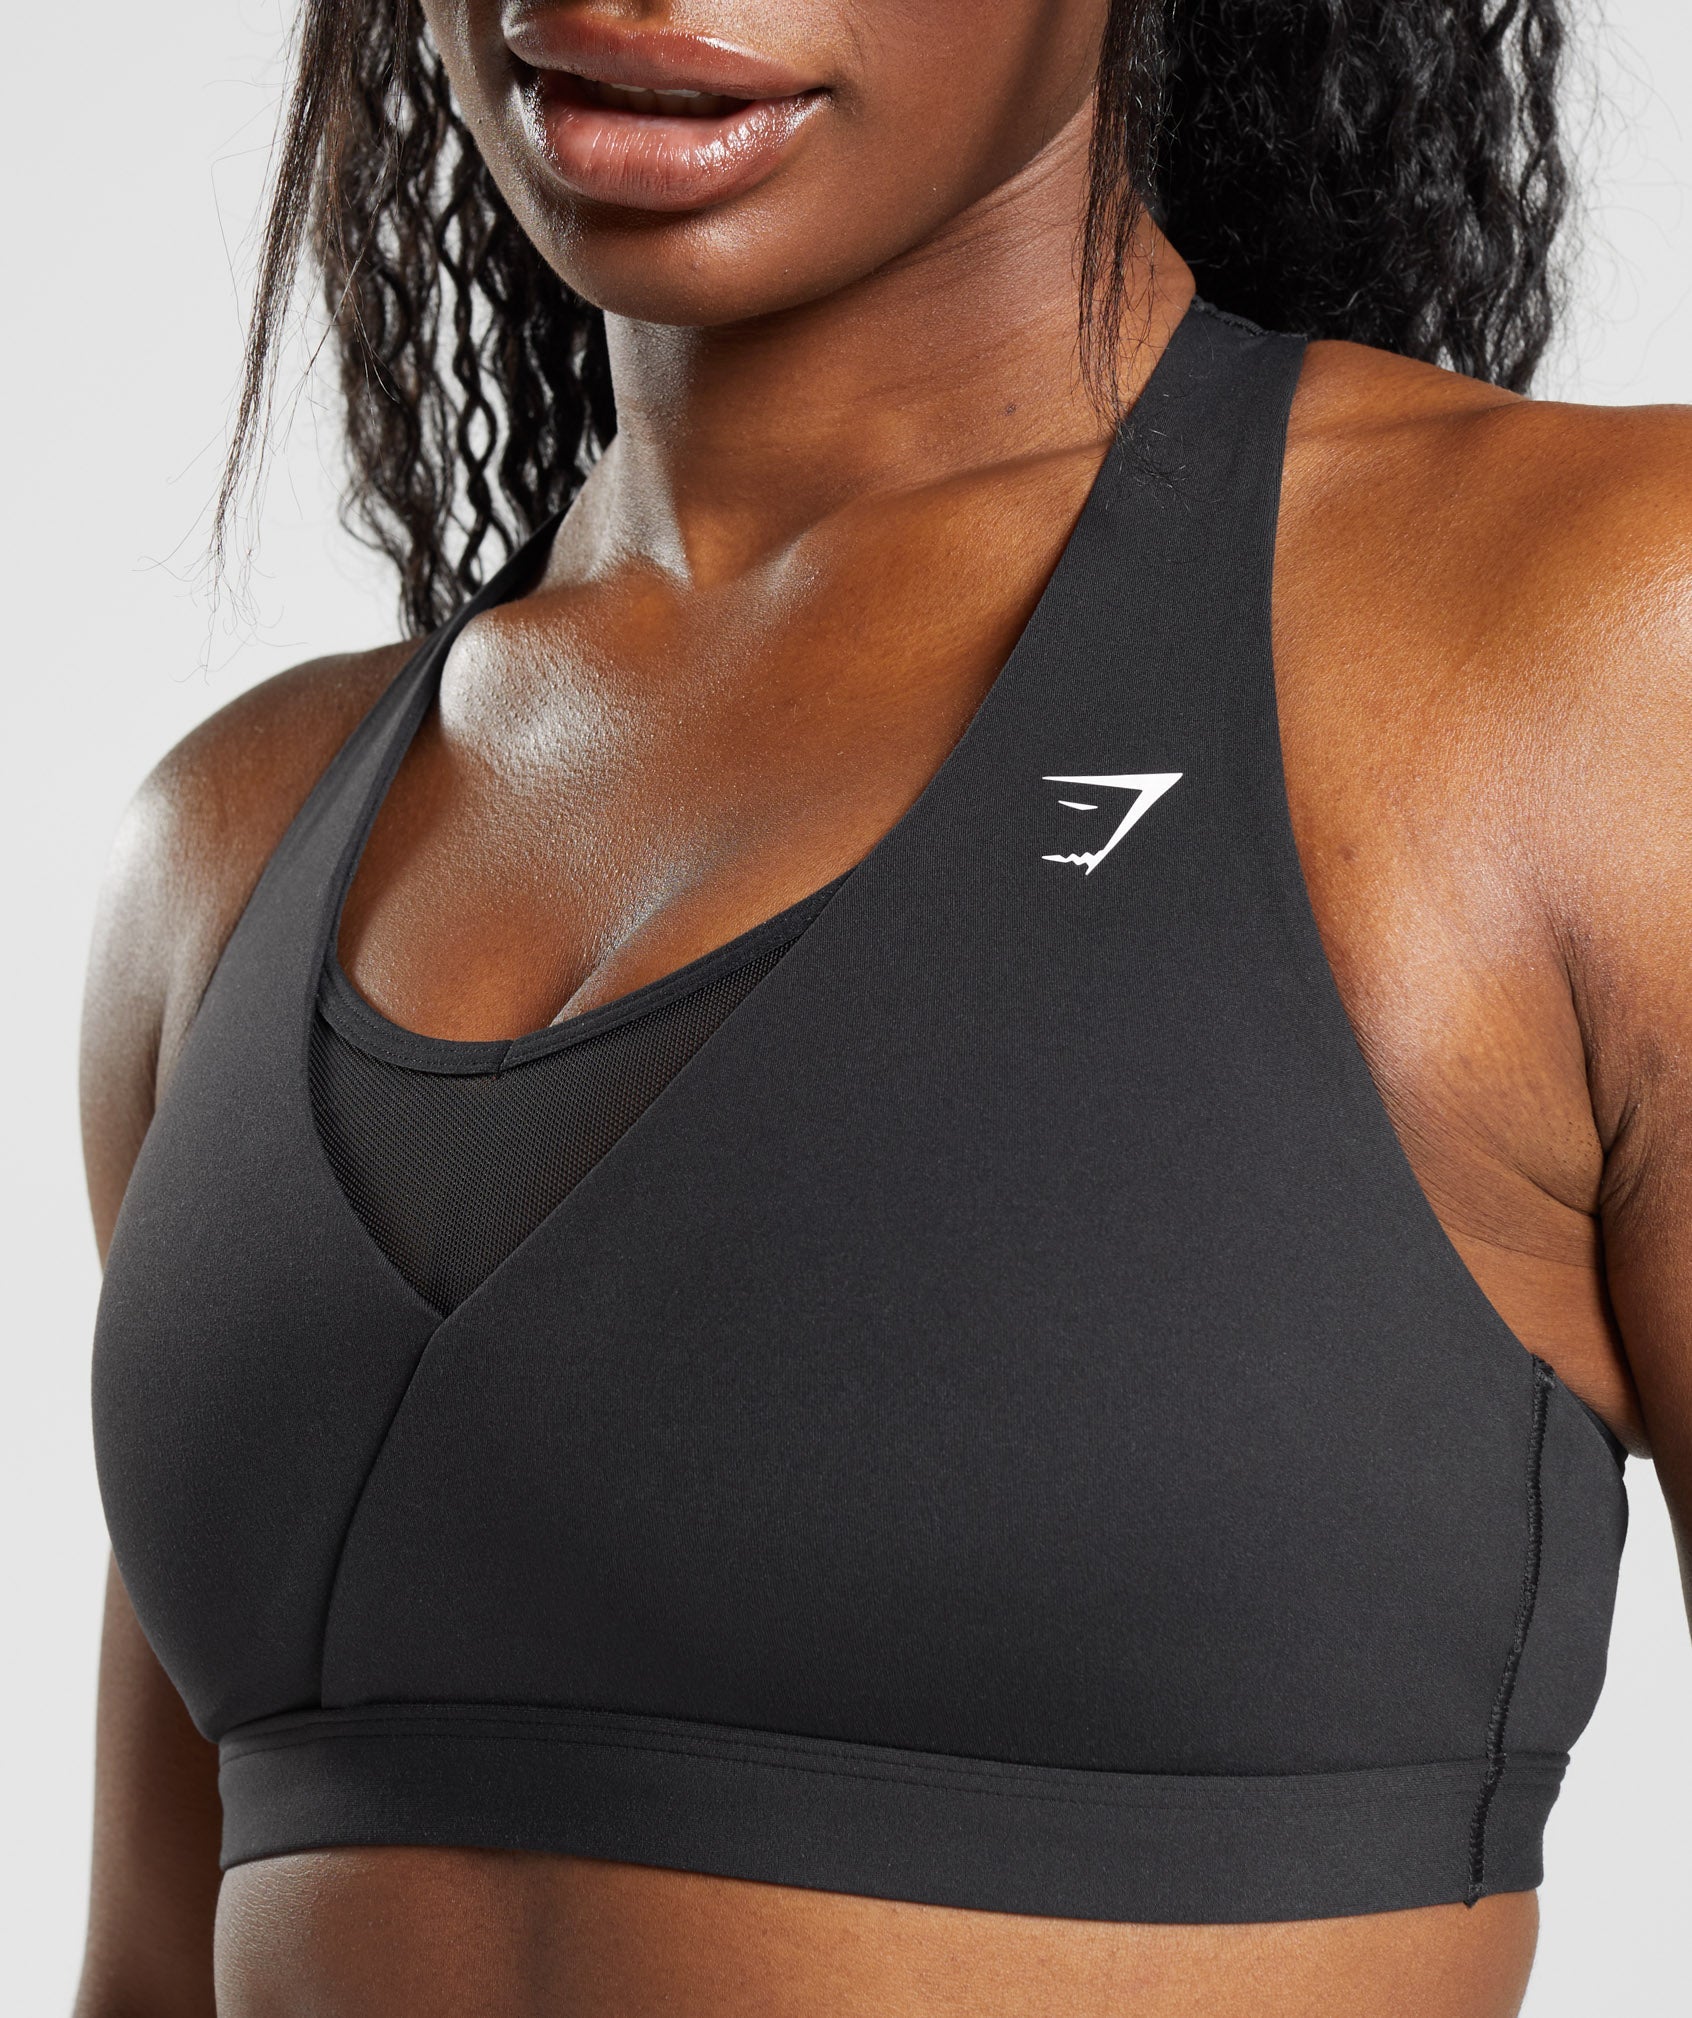 crossover.mv - Now Available! Puma sports bra. Available sizes XS